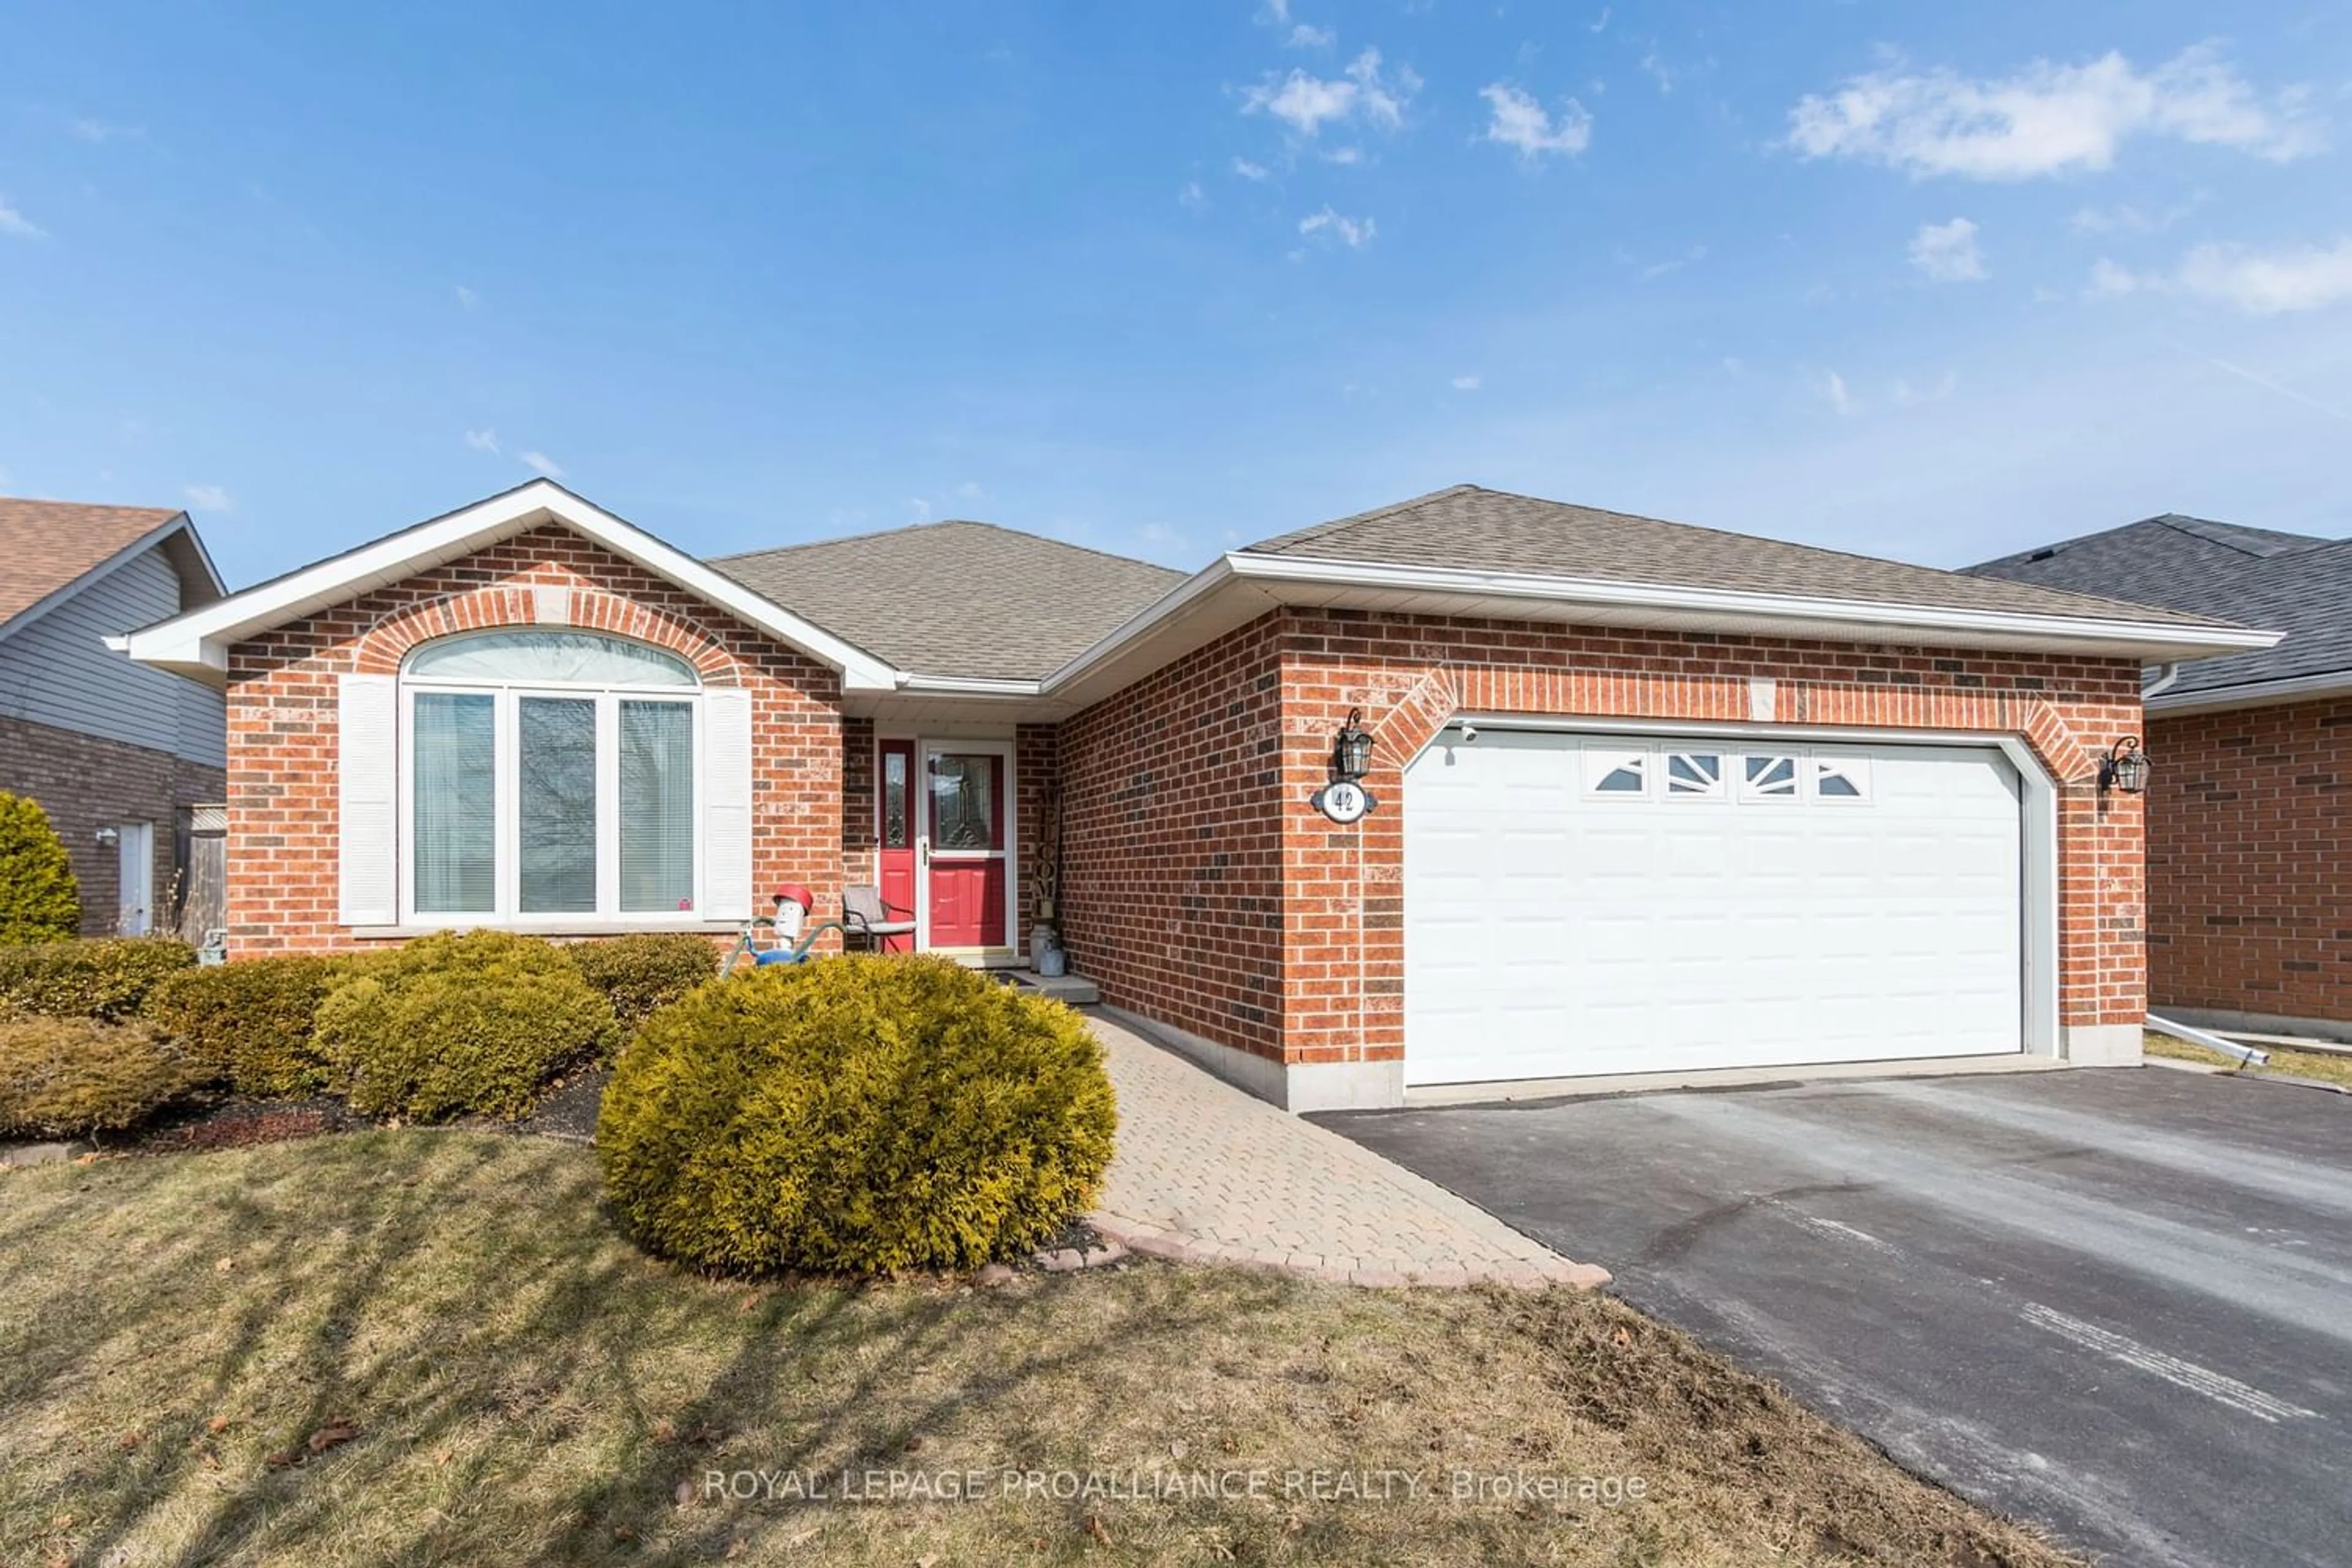 Home with brick exterior material for 42 Spruce Gdns, Belleville Ontario K8N 5Y6